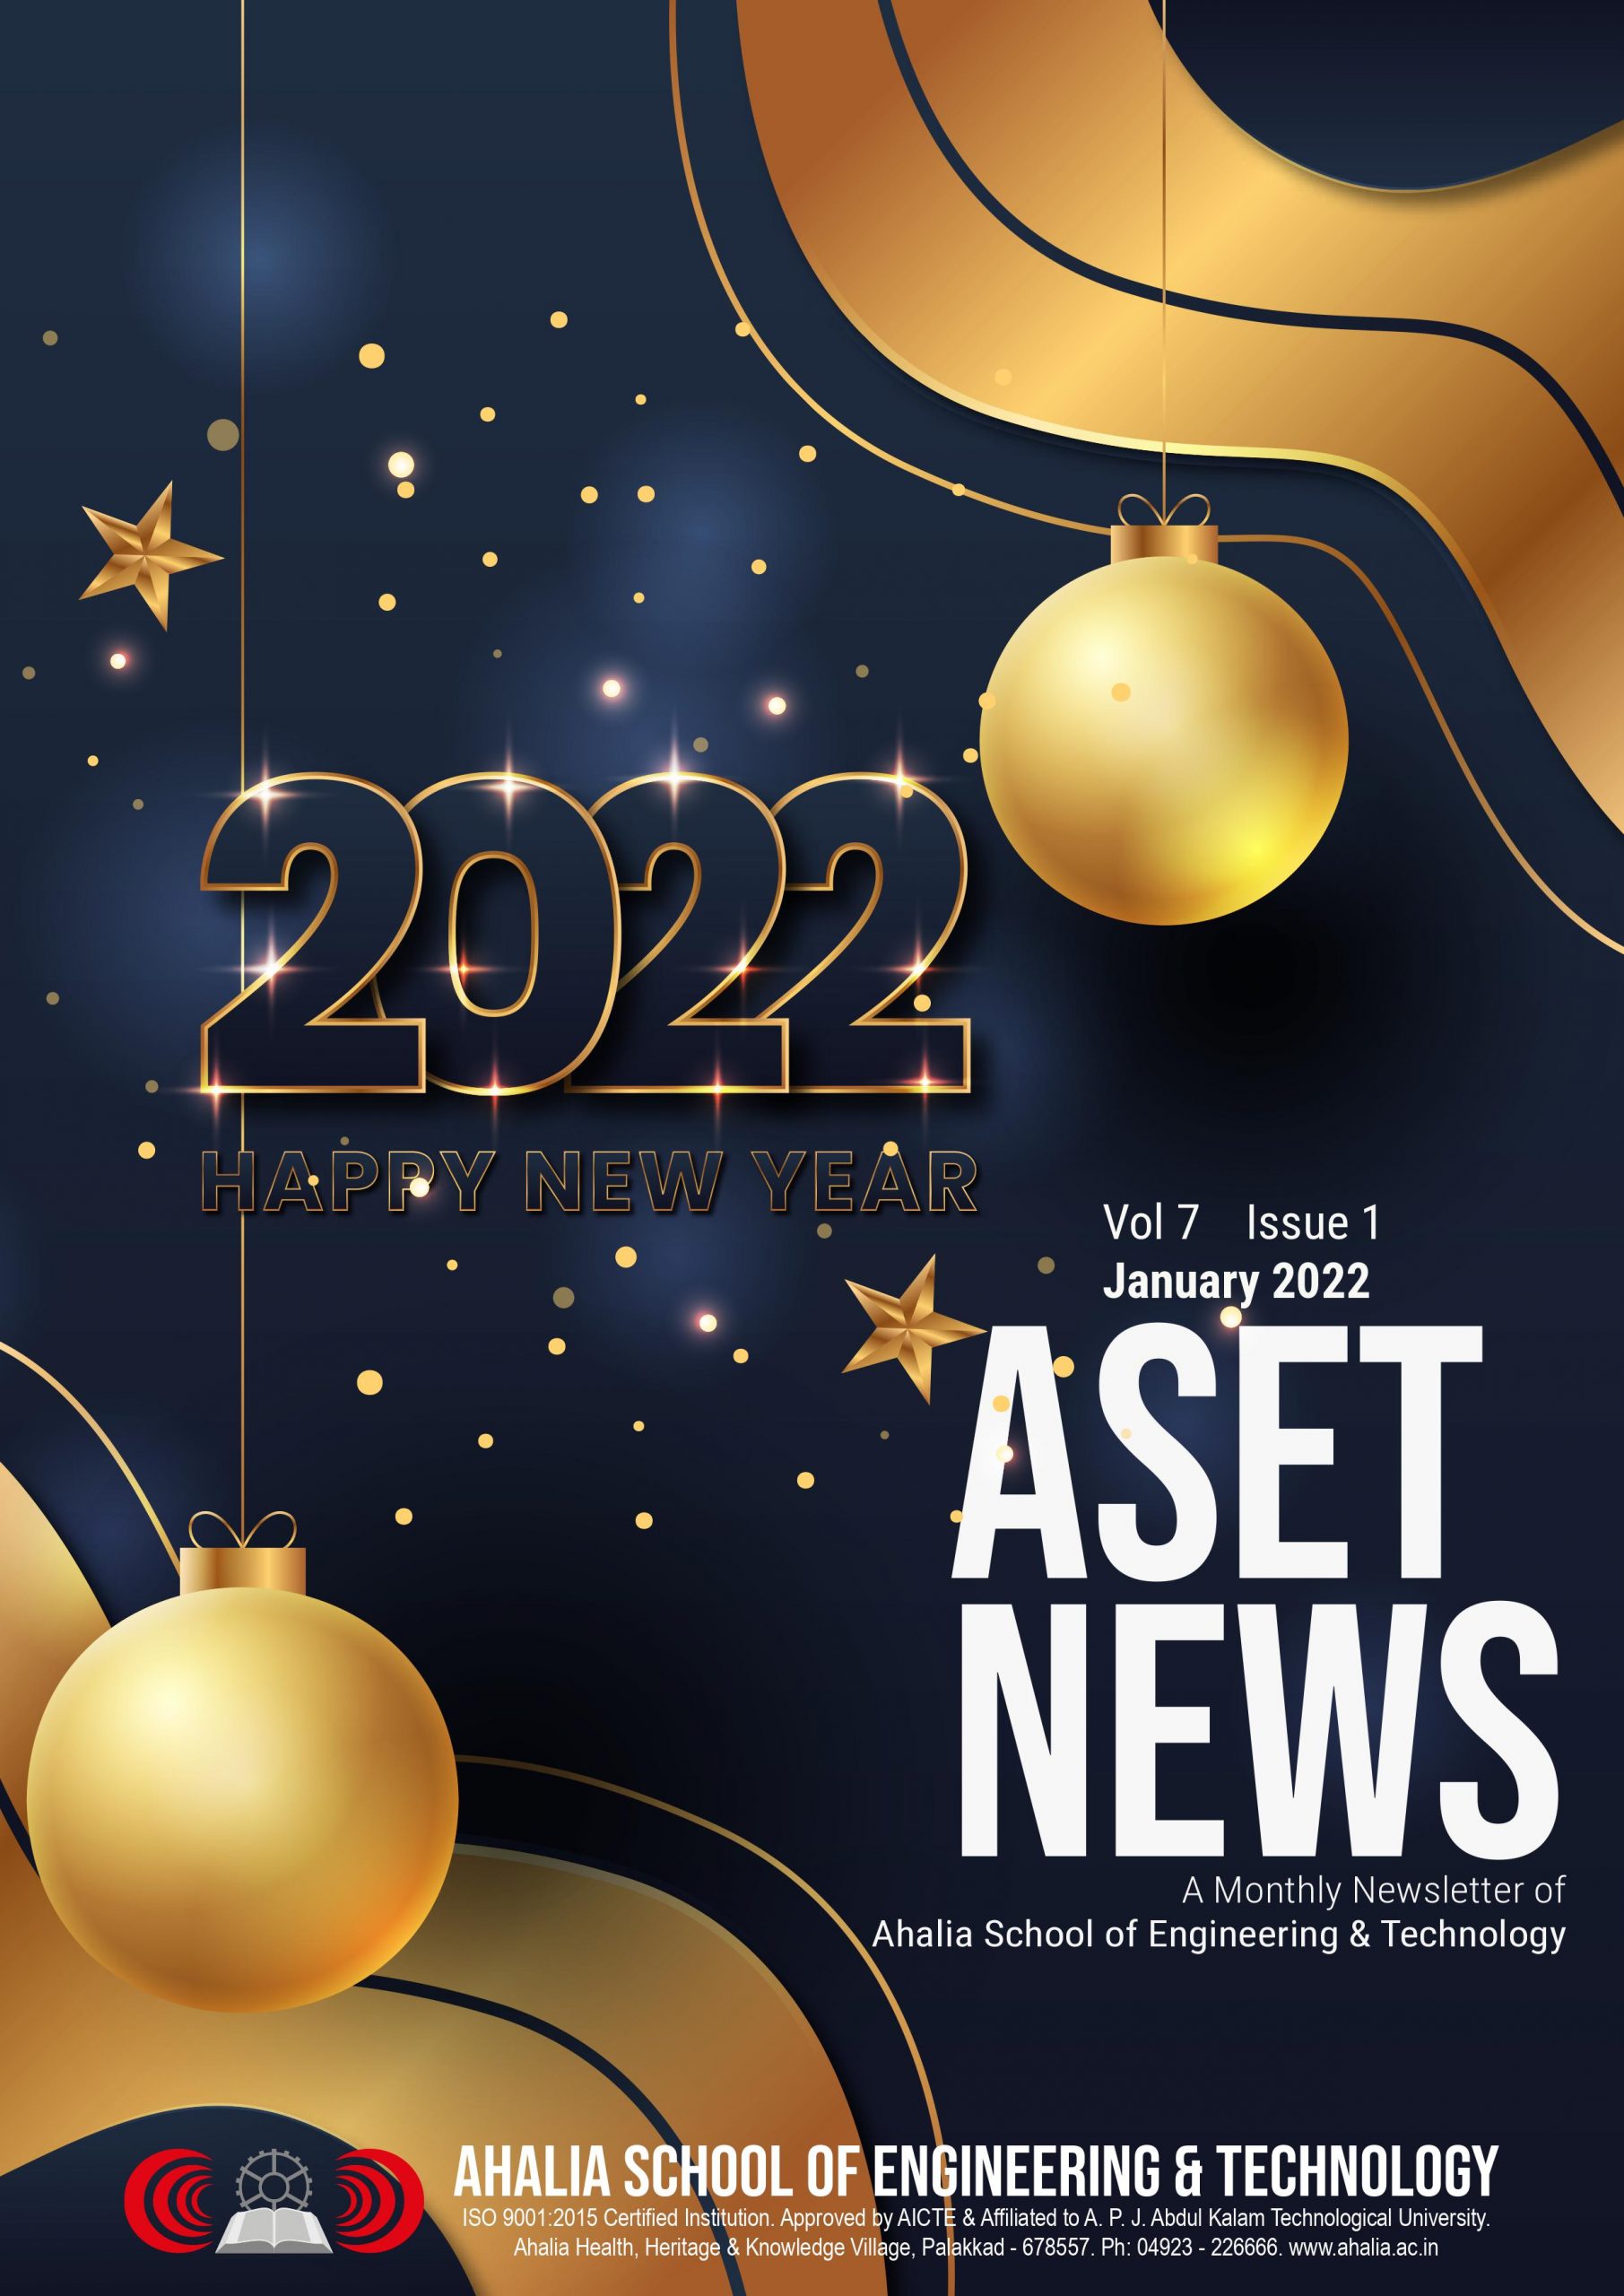 January 2022 ASET NEWS Released